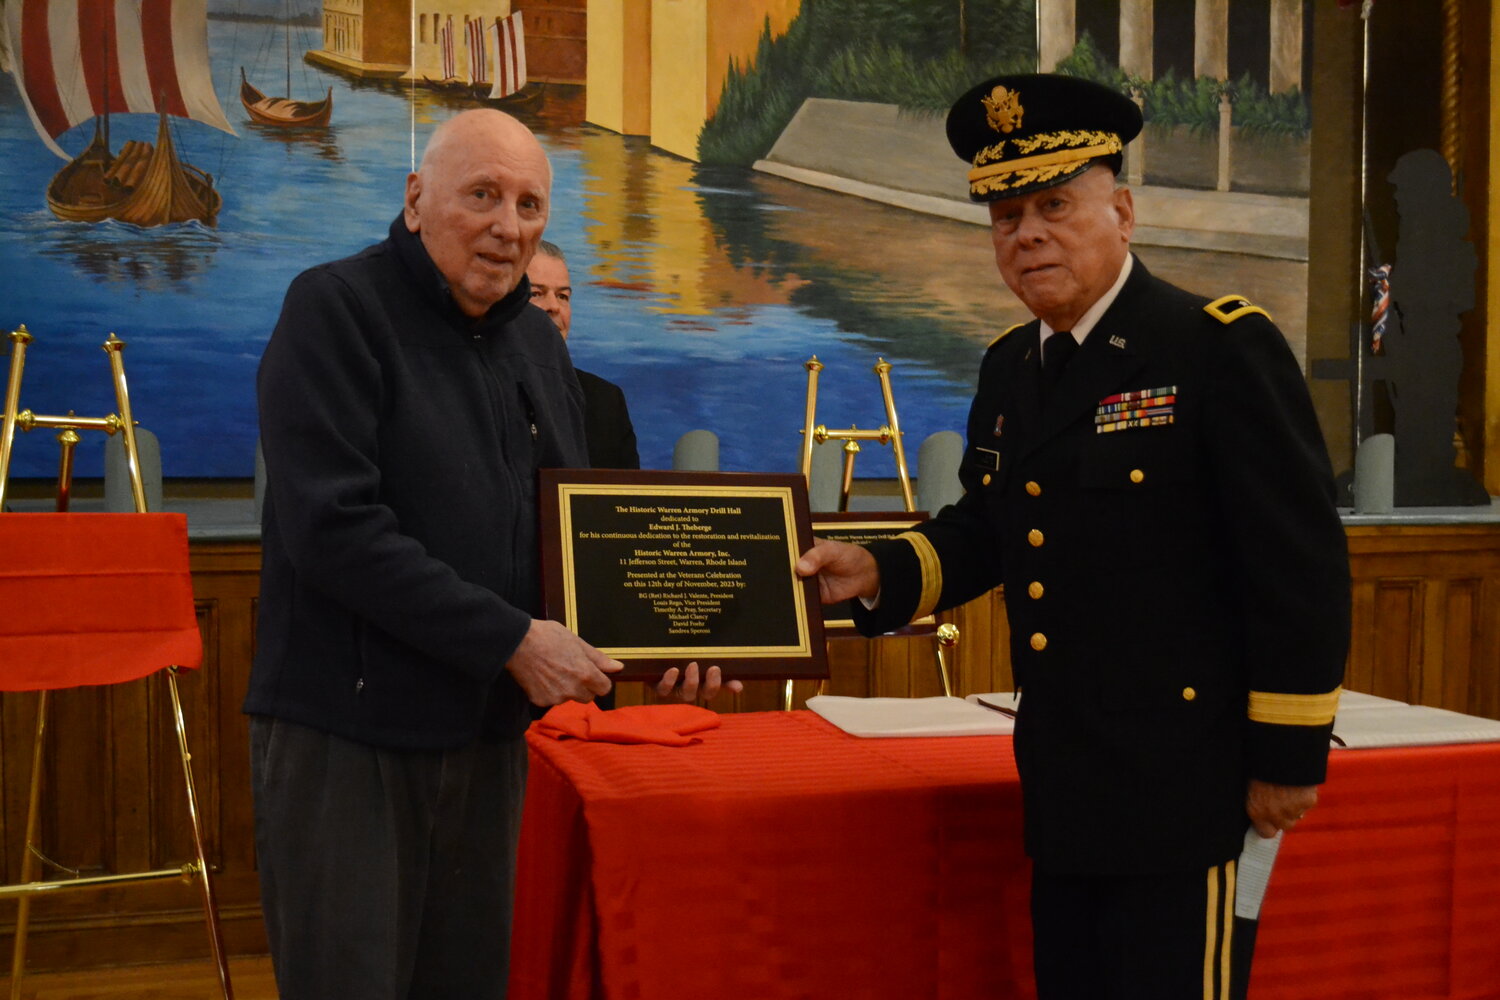 Edward Theberge, who has been a volunteer and active advocate for The Warren Armory for decades, receives a plaque and learned that the hall where the ceremony was taking place would be named after him.